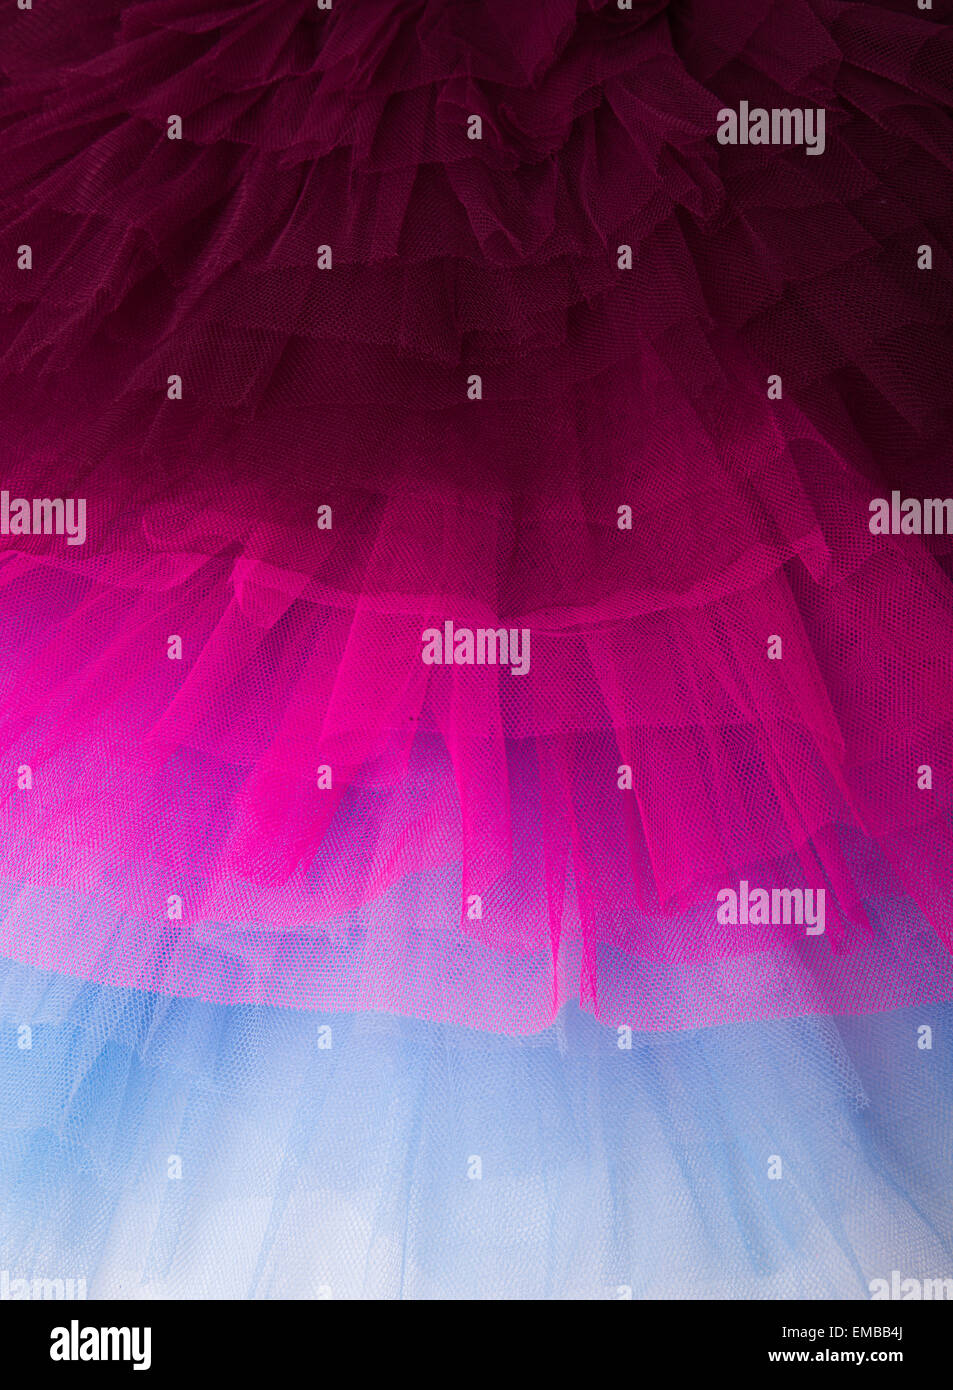 Layers of netting from Tutus. Stock Photo